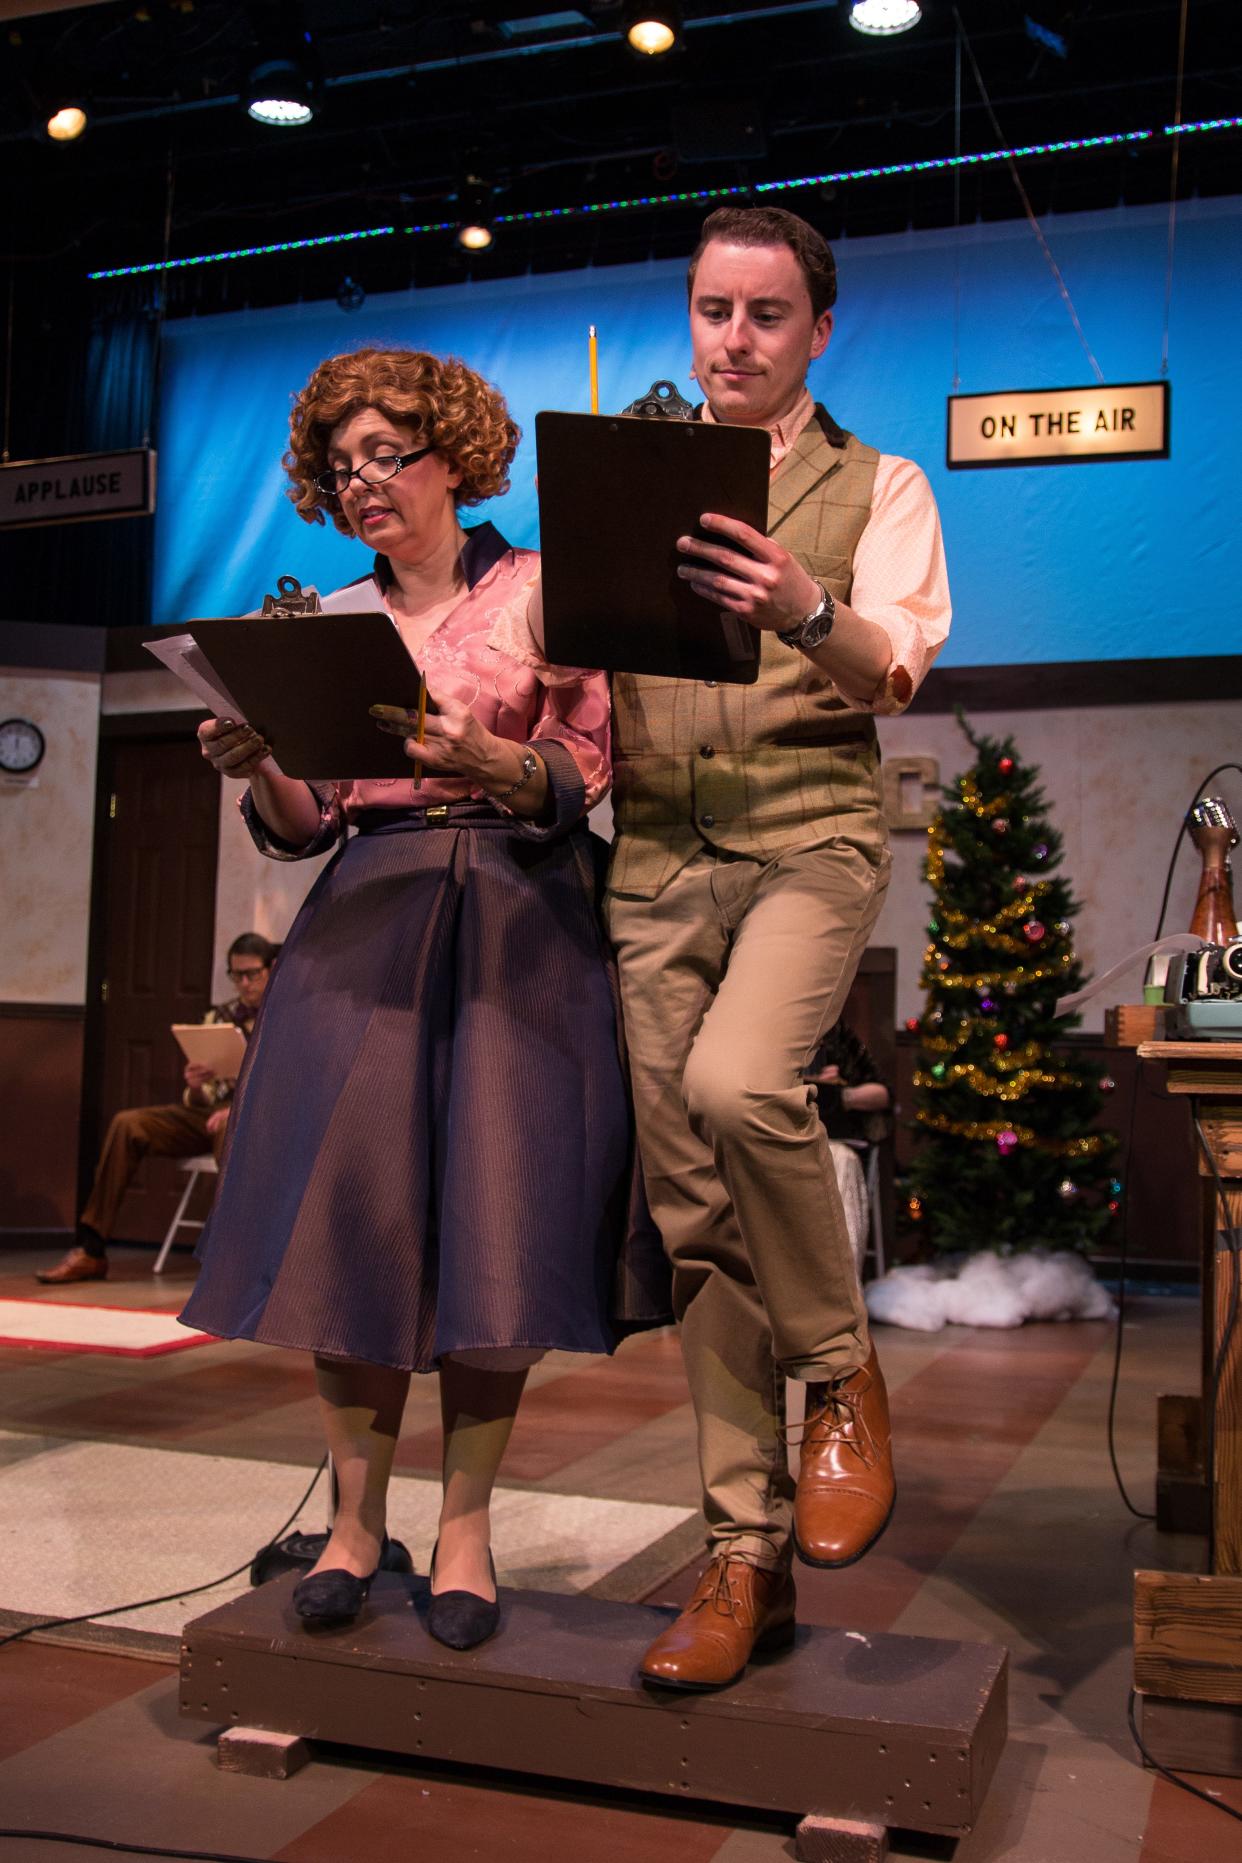 Stage manager Gladys Murphy, portrayed by Sharon Gibson, and station manager Gordon Fitzgerald, played by Kyle Cooknick, do their bit to save WNBC radio’s annual Christmas Eve broadcast during “It’s a Wonderful Life: On Air." The play runs Dec. 1-23 at the Simi Valley Cultural Arts Center.